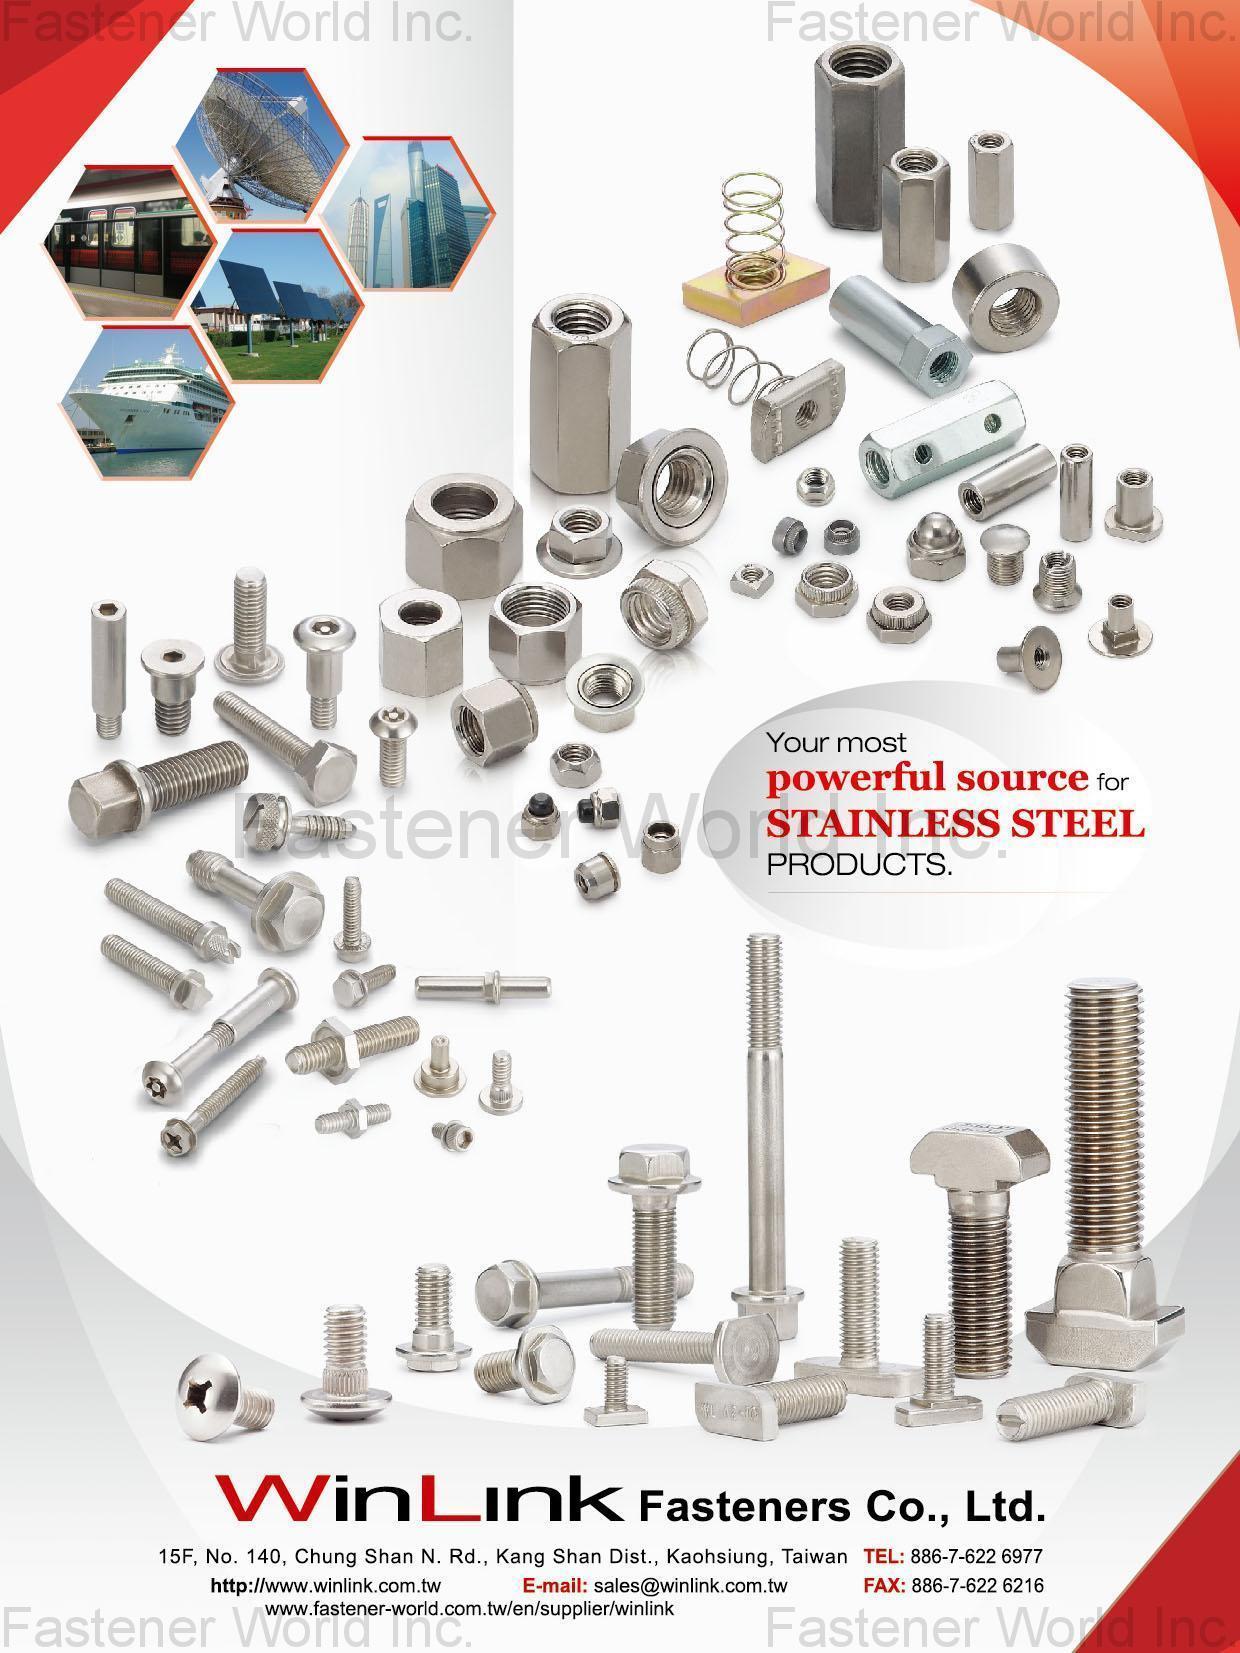 WINLINK FASTENERS CO., LTD.  , Stainless Steel Products , Stainless Steel